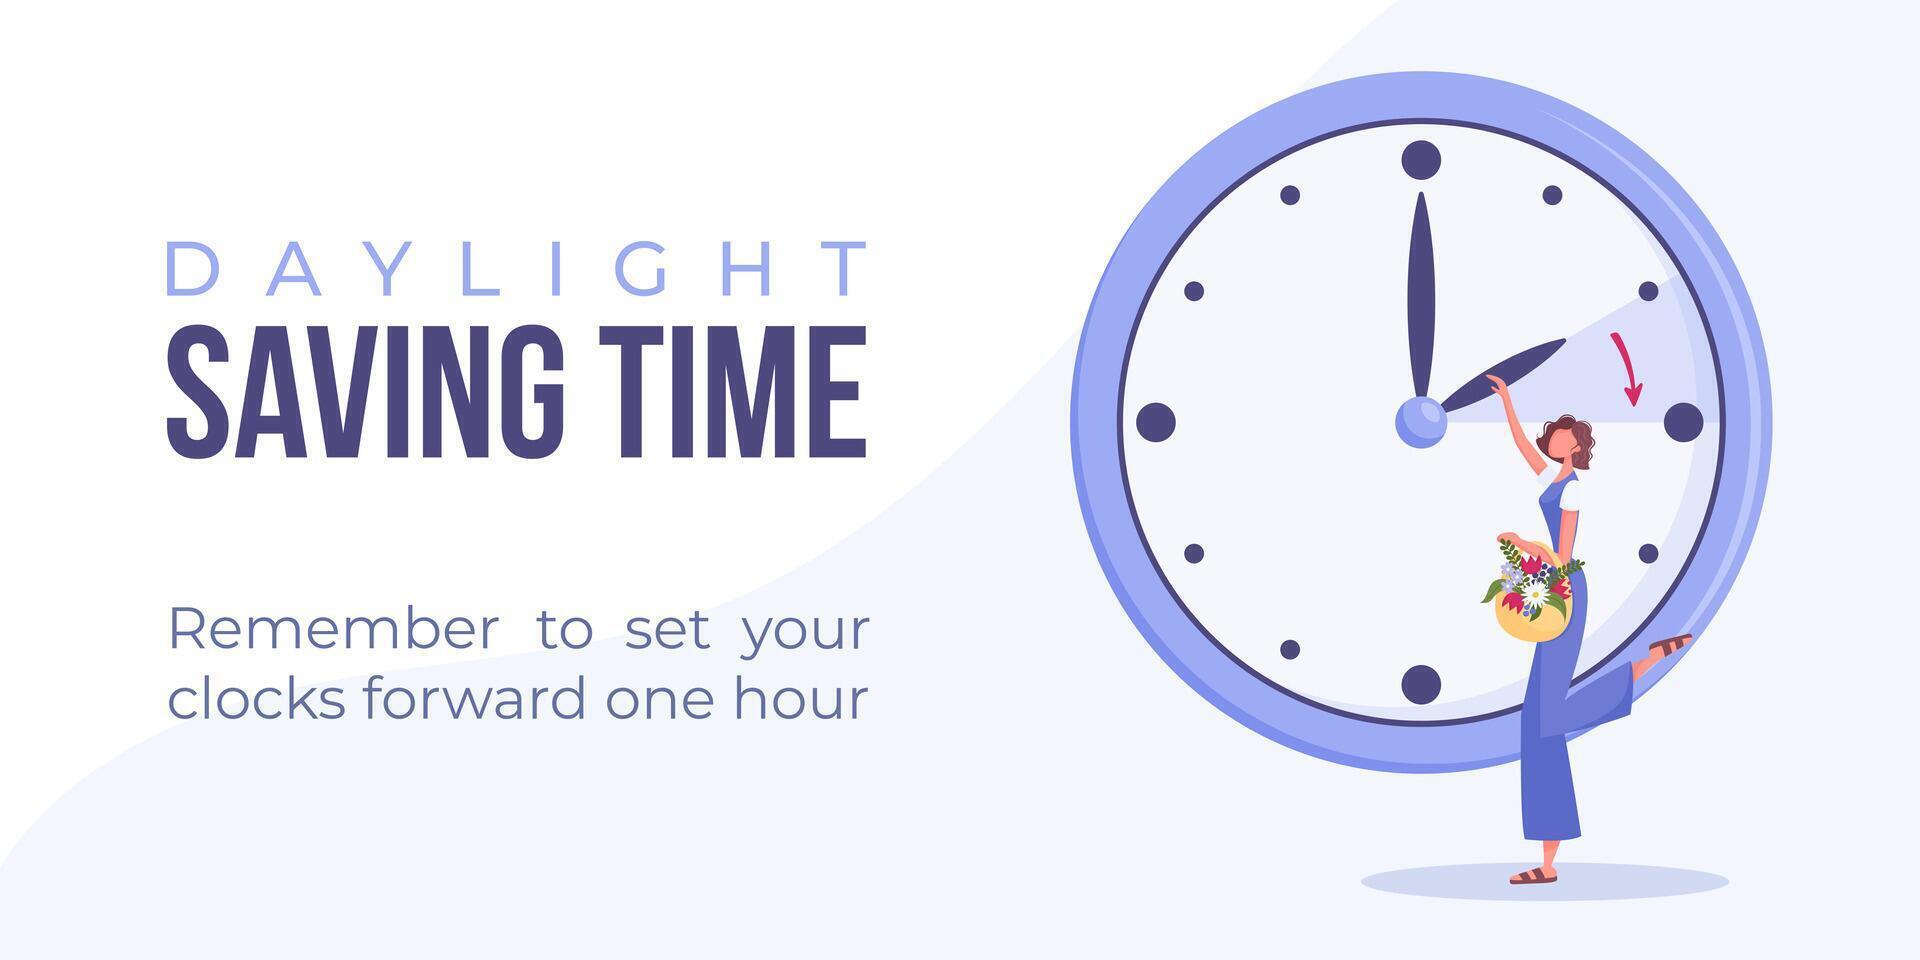 Daylight saving time begins concept. Spring forward web banner, poster. Vector illustration with brunette woman turning clock hour ahead, woman with flowers in bag.